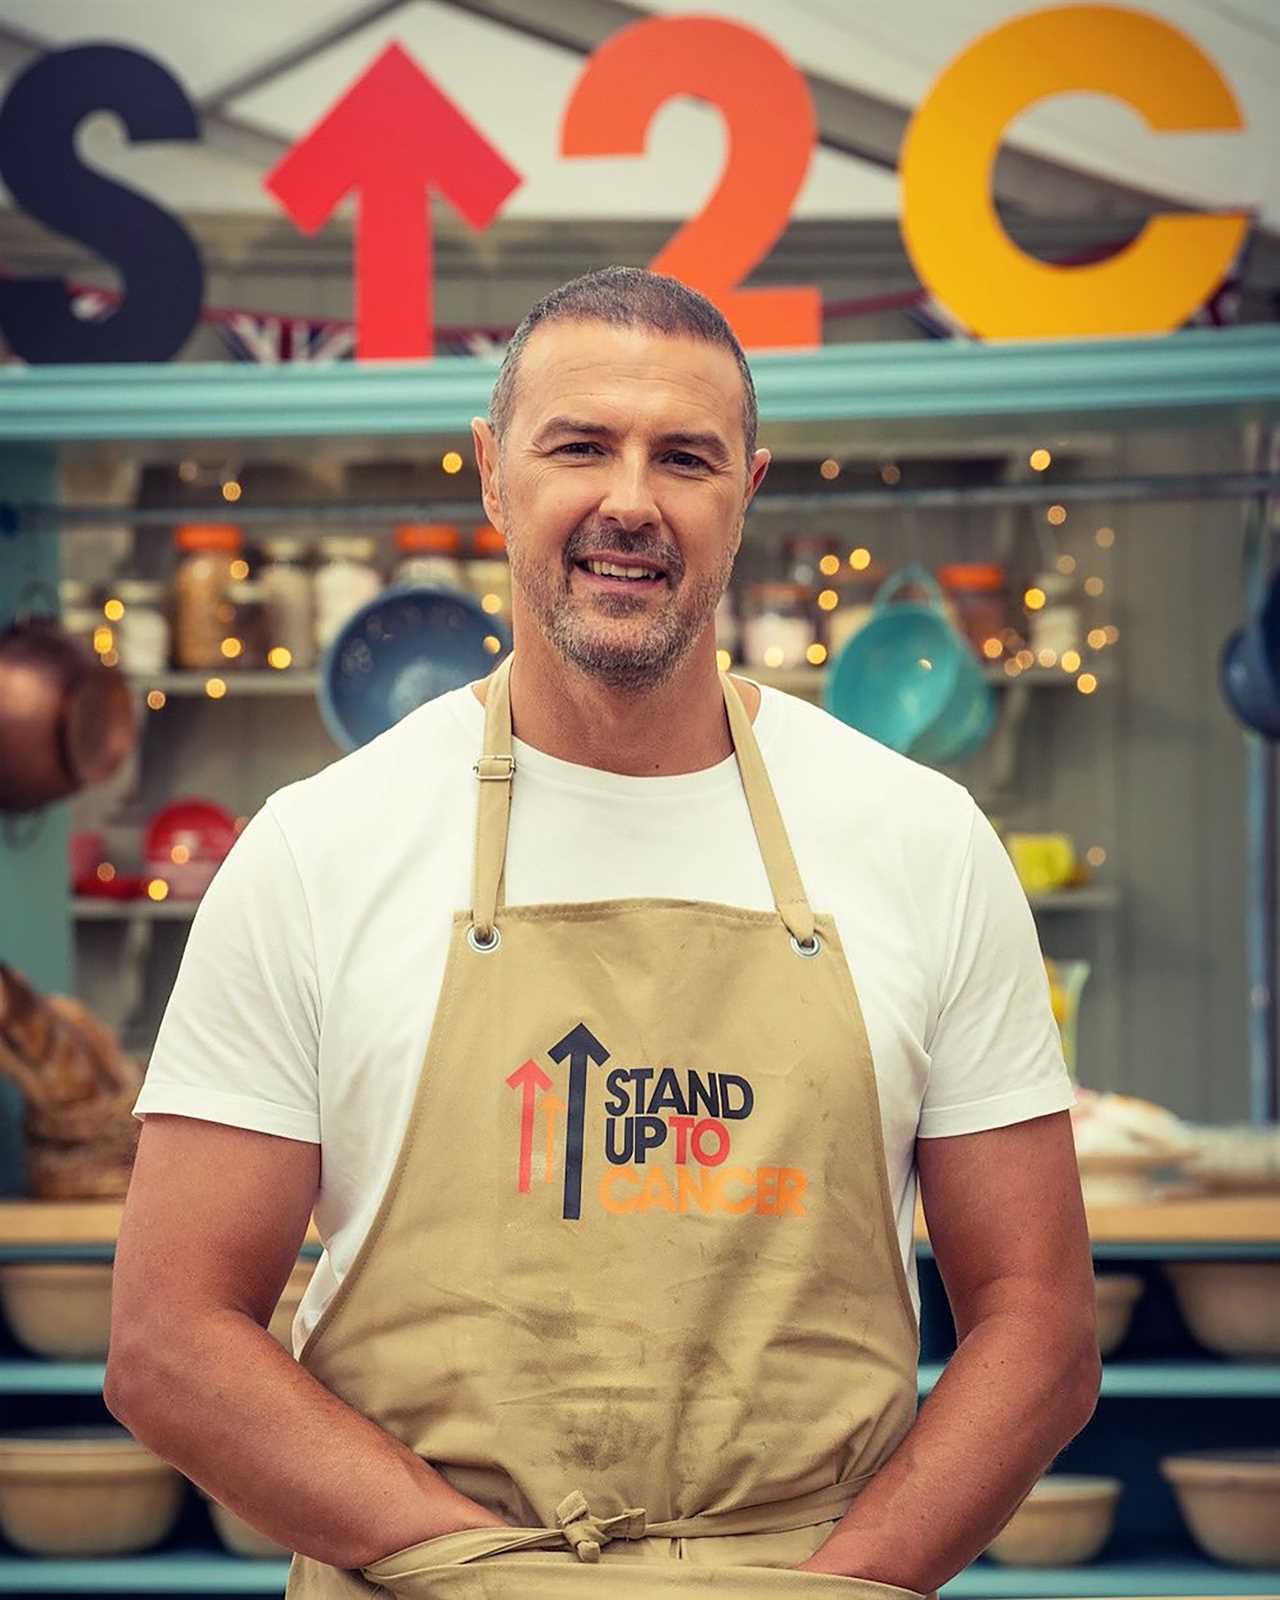 Celebrity GBBO in chaos as Coleen Nolan asks Paddy McGuinness ‘what the hell is that?’